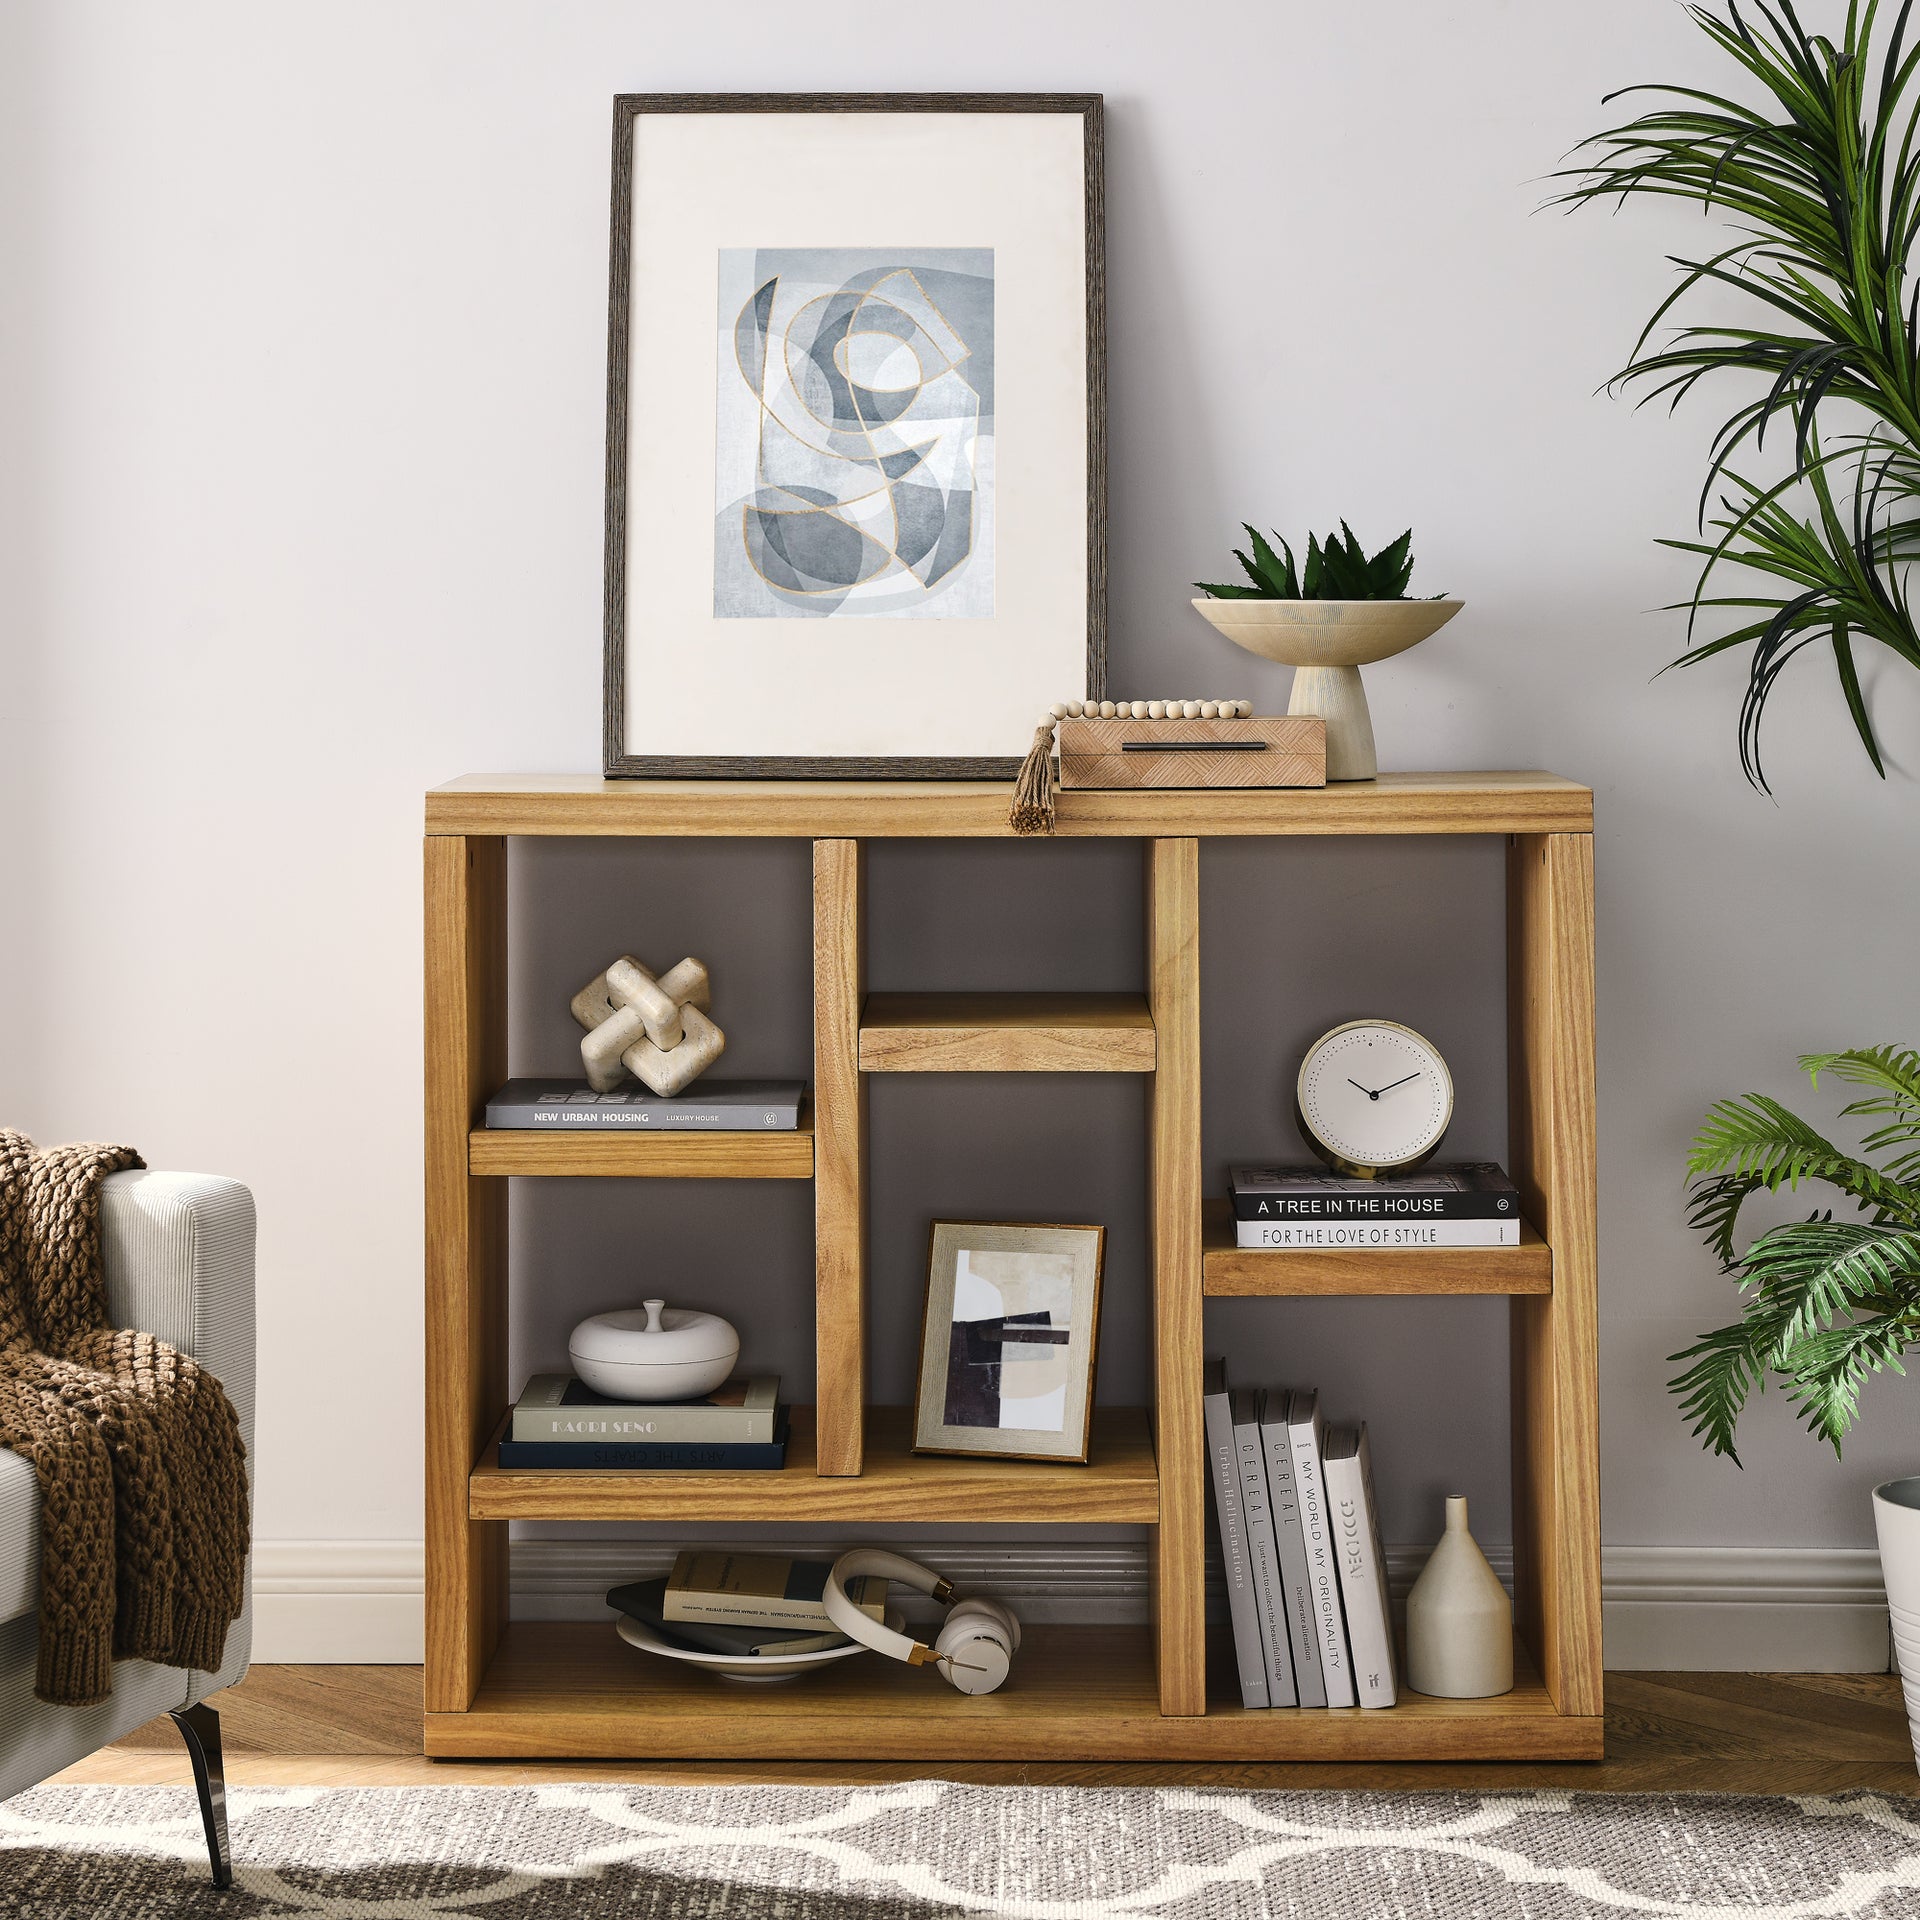 Open Wooden Open Shelf Bookcase, Freestanding Display Storage Cabinet with 7 Cube Storage Spaces